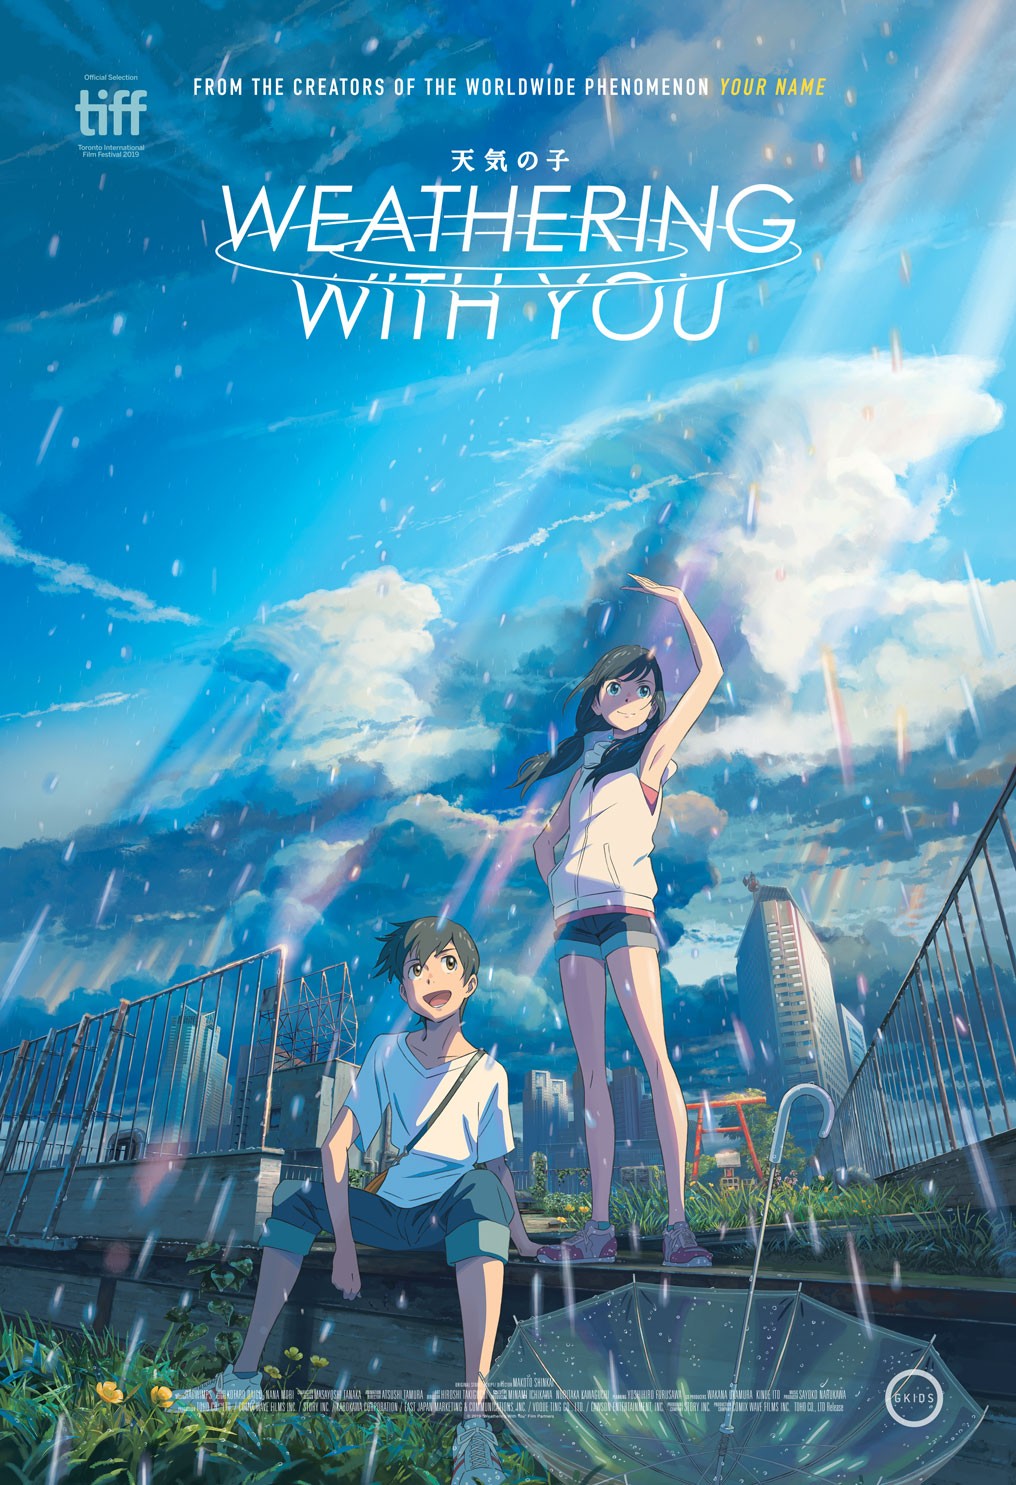 Weathering with You' is coming to Netflix on July 31